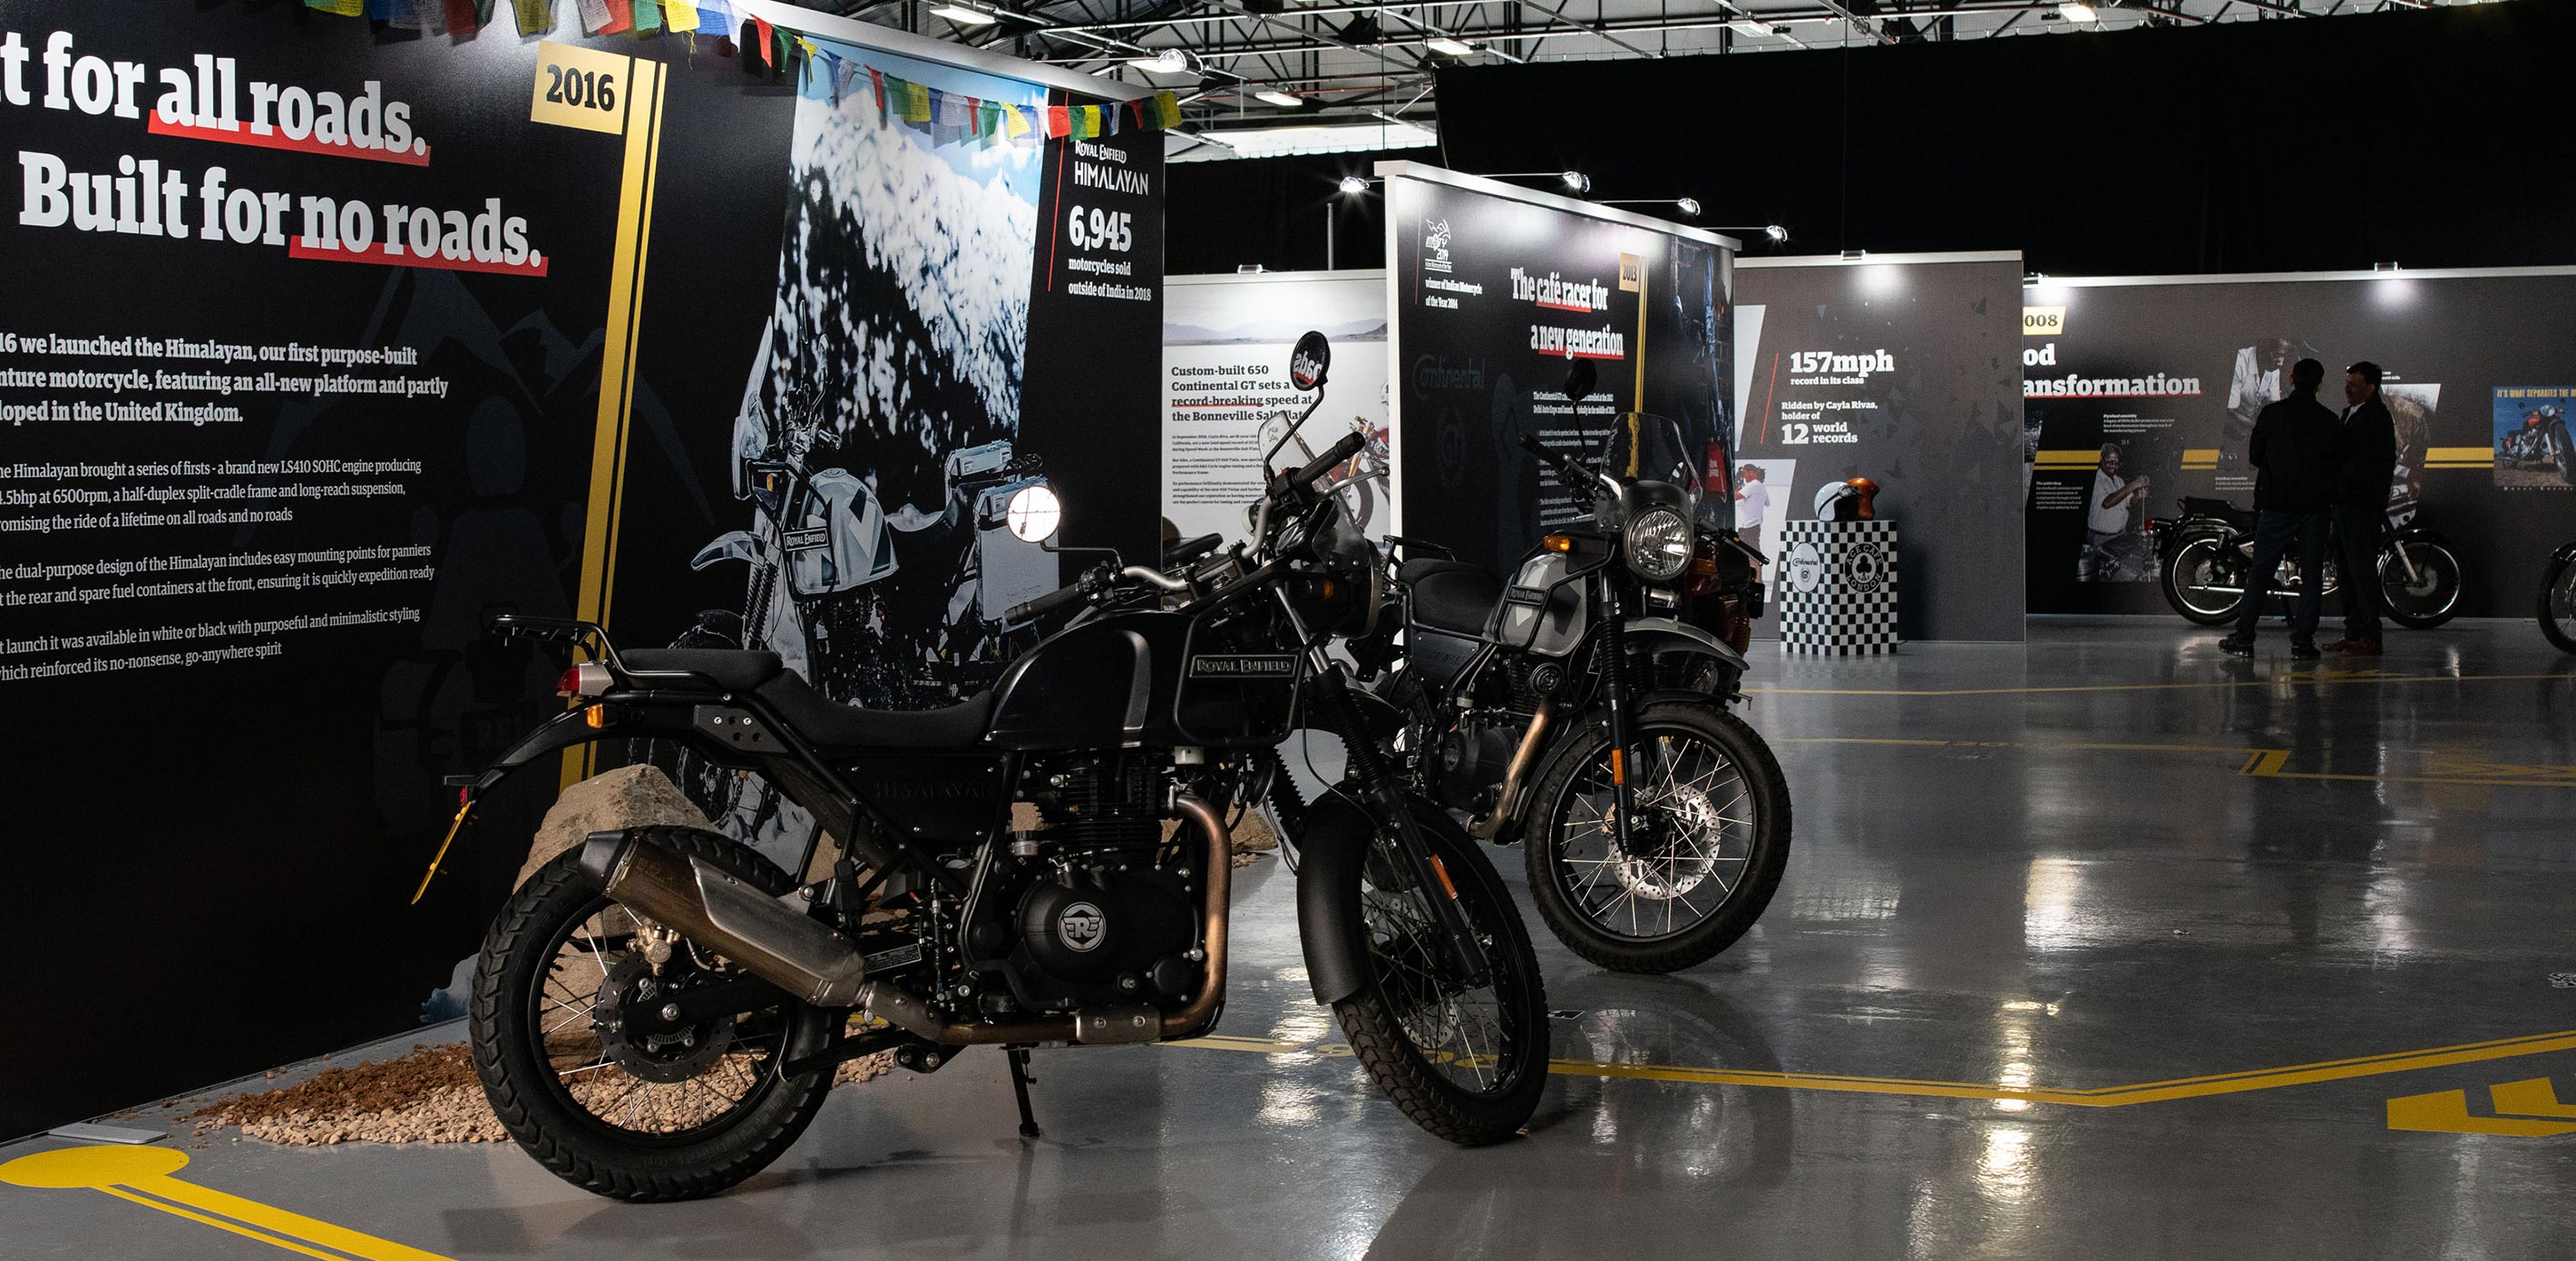 Space-worldwide-Royal Enfield investor conference design